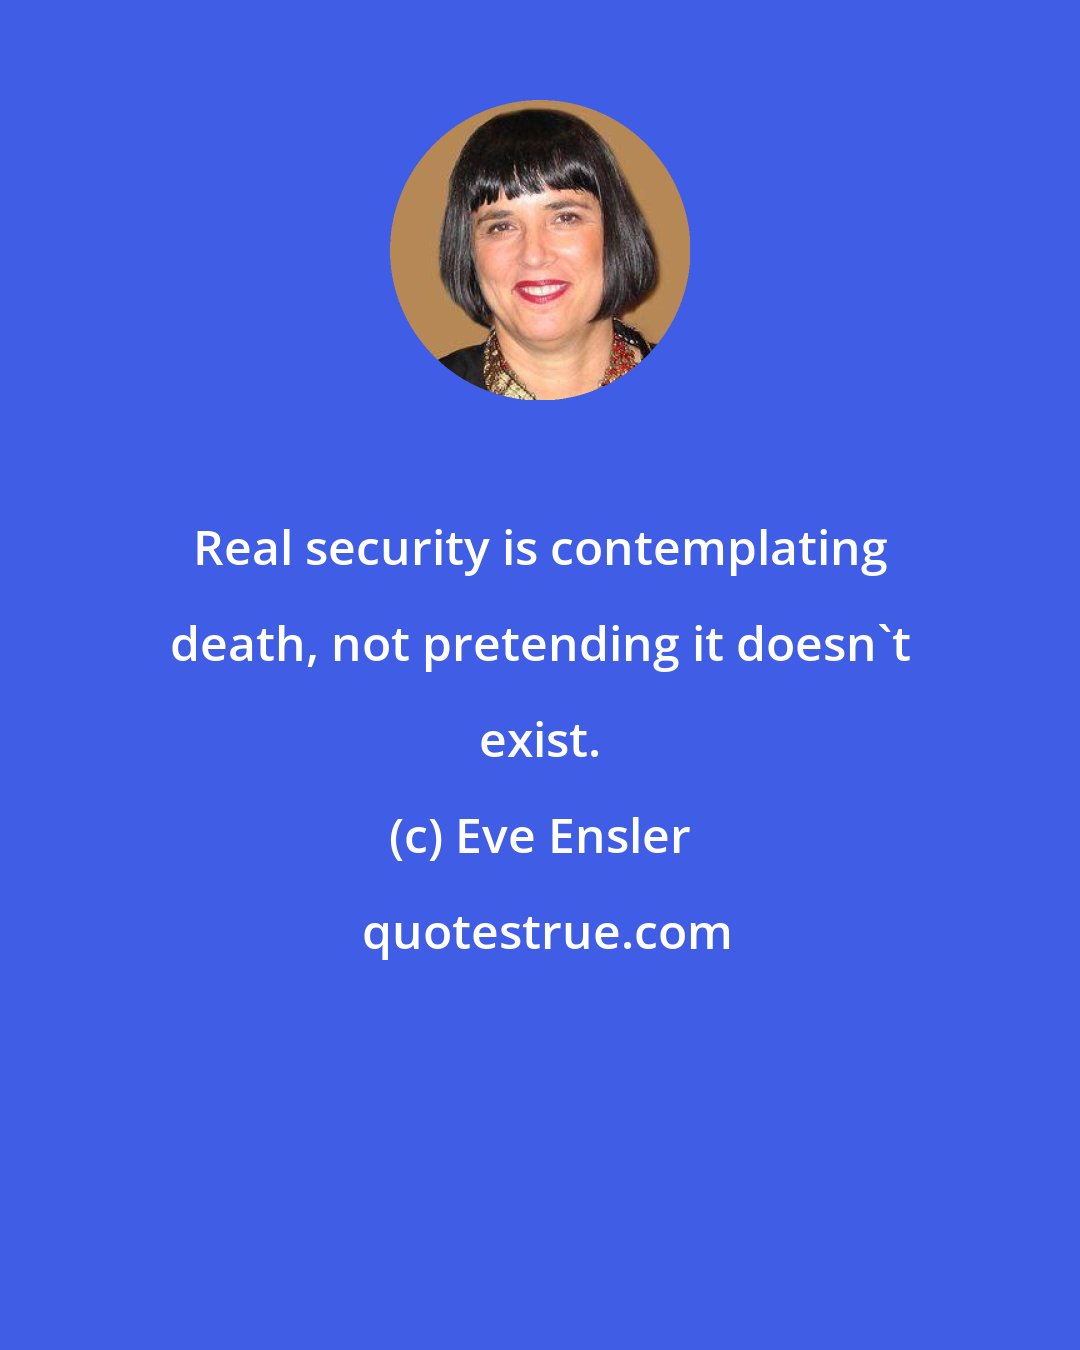 Eve Ensler: Real security is contemplating death, not pretending it doesn't exist.